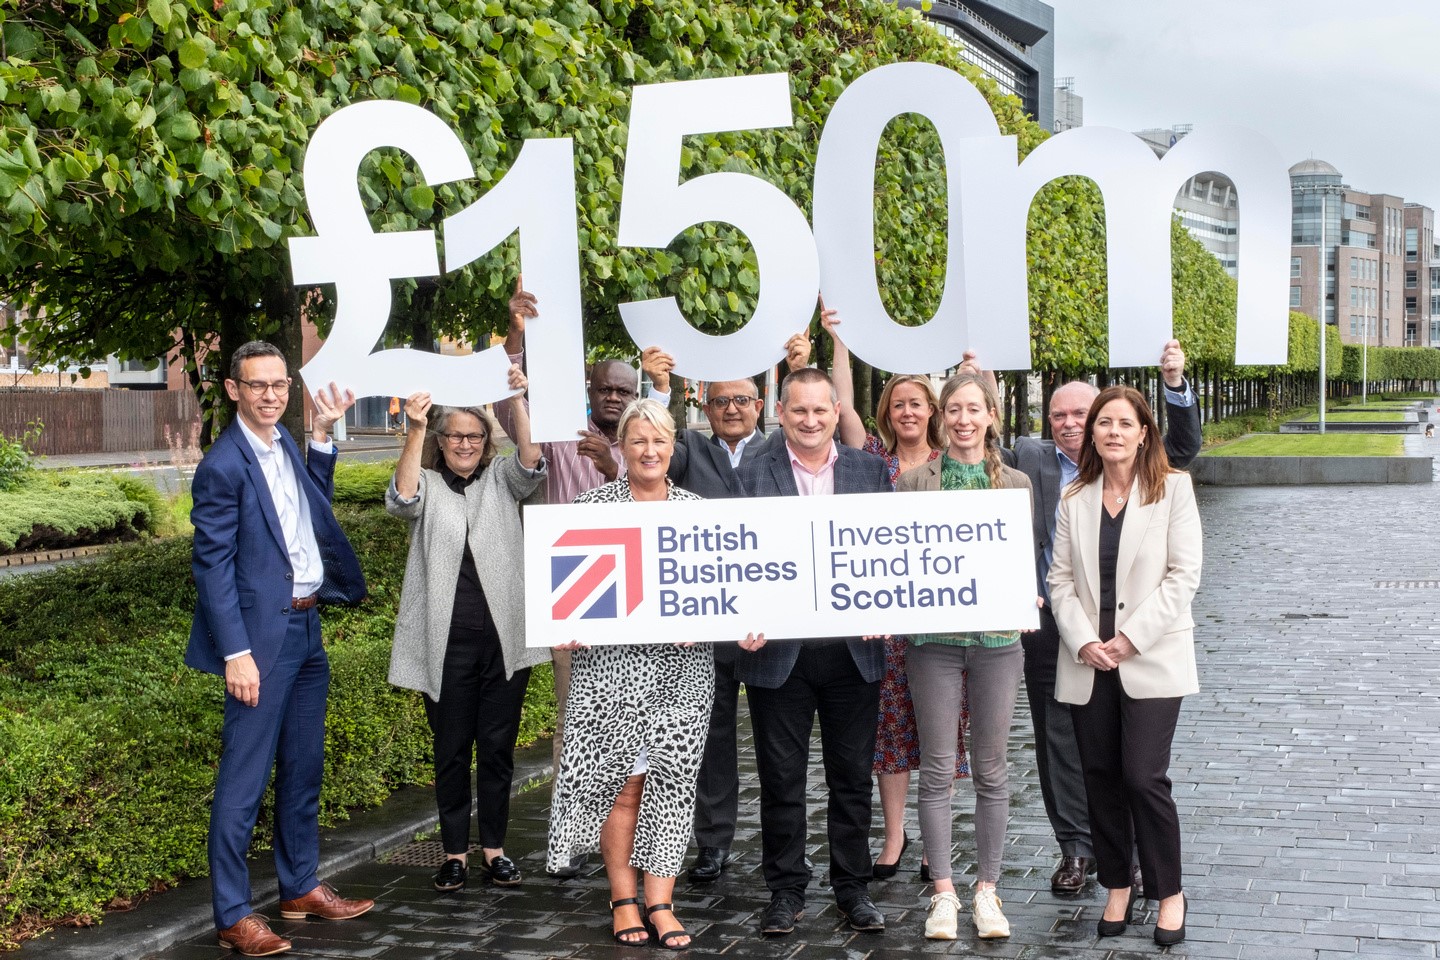 British Business Bank launches new £150m investment fund for Scottish businesses